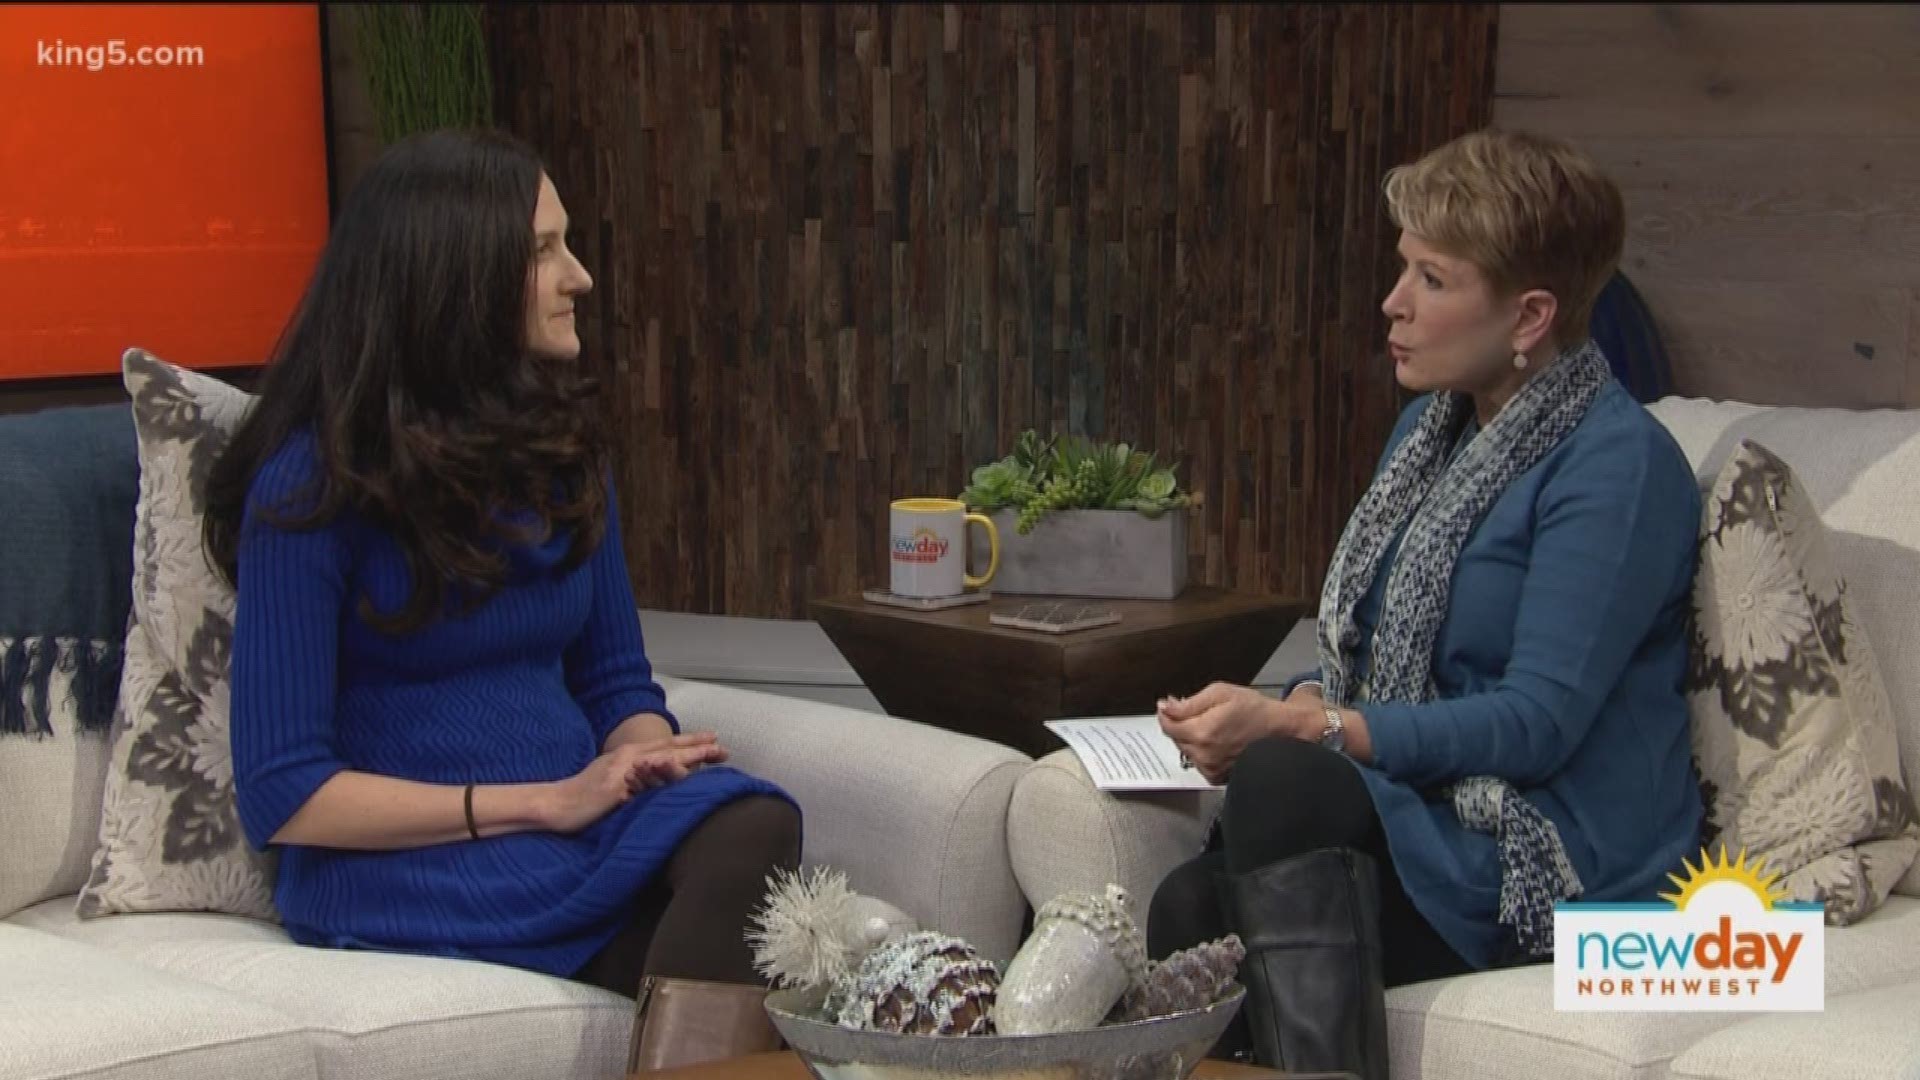 Certified nurse midwives at Swedish provide personalized care to women throughout their pregnancies. Director of the Midwifery Program at Swedish Lisa Arnold explains what a certified nurse midwife can do for you. This segment is sponsored by Swedish Medical Center.